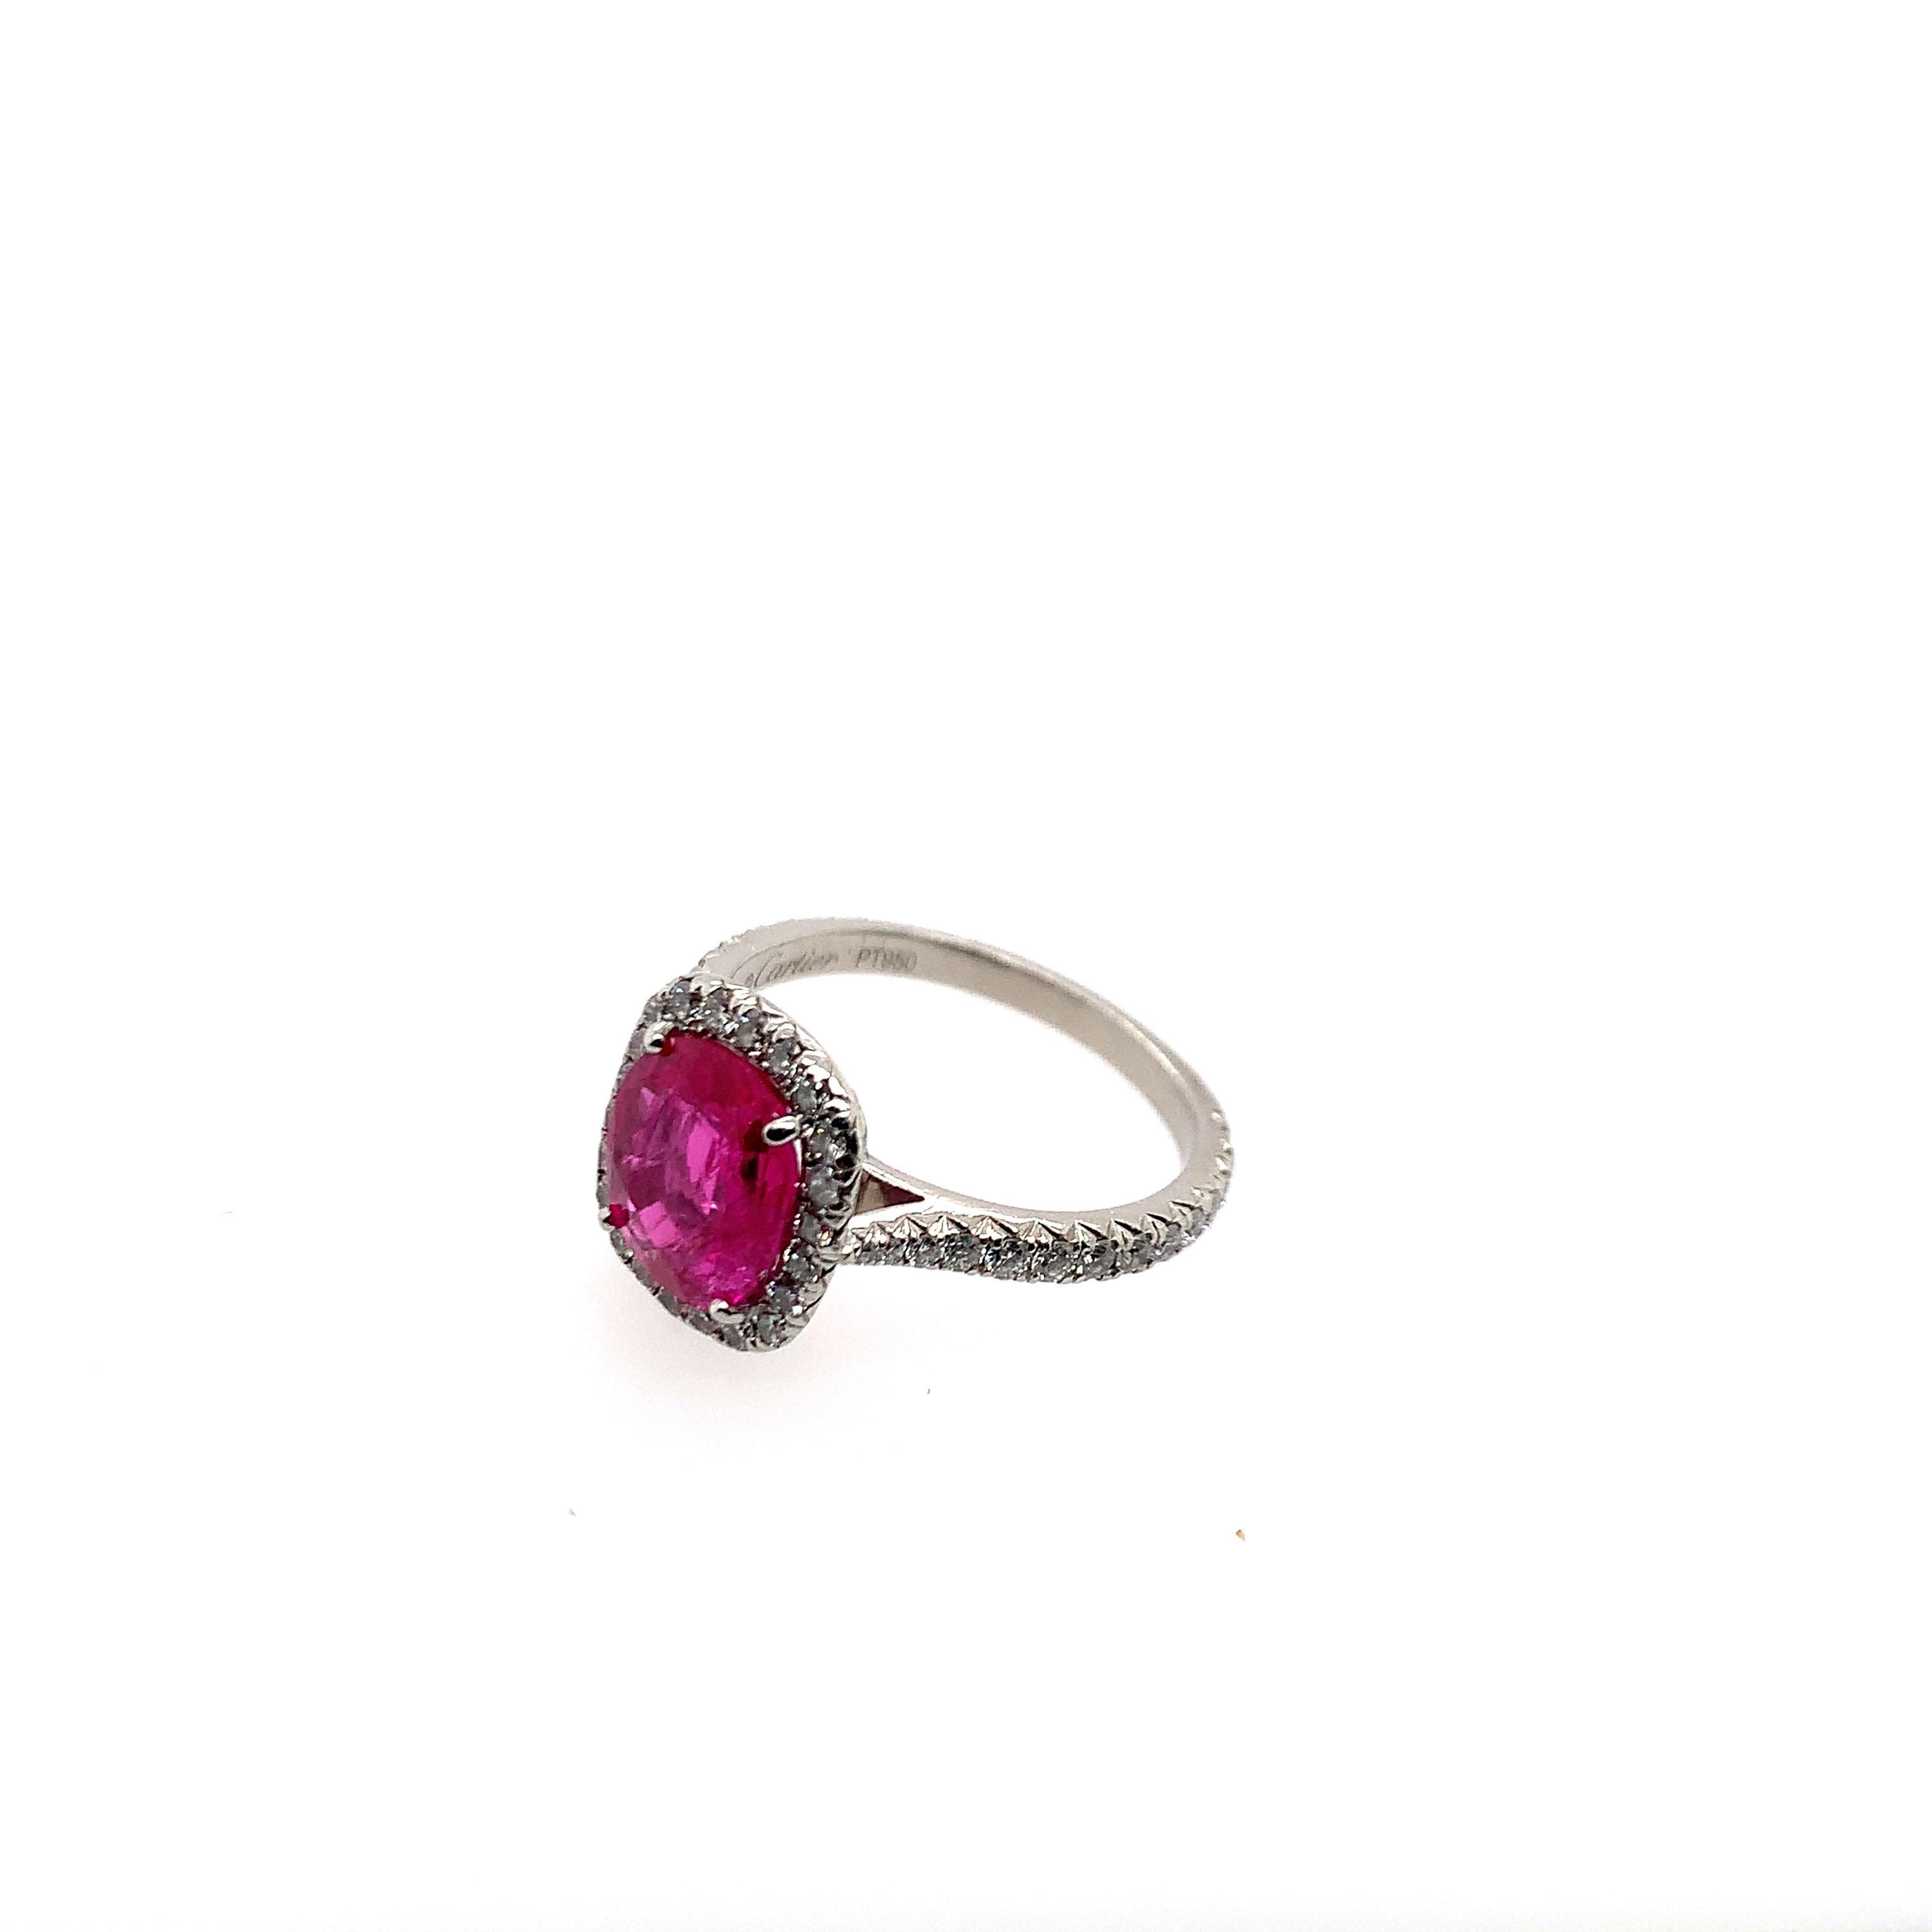 Set with an oval-cut ruby weighing approximately 1.65 carats, the frame and shoulders accented by round diamonds, in 18k white gold, size 5 3/4
With report 5211472392 dated 19 February 2021 from AGL laboratory, stating natural ruby. Geographic